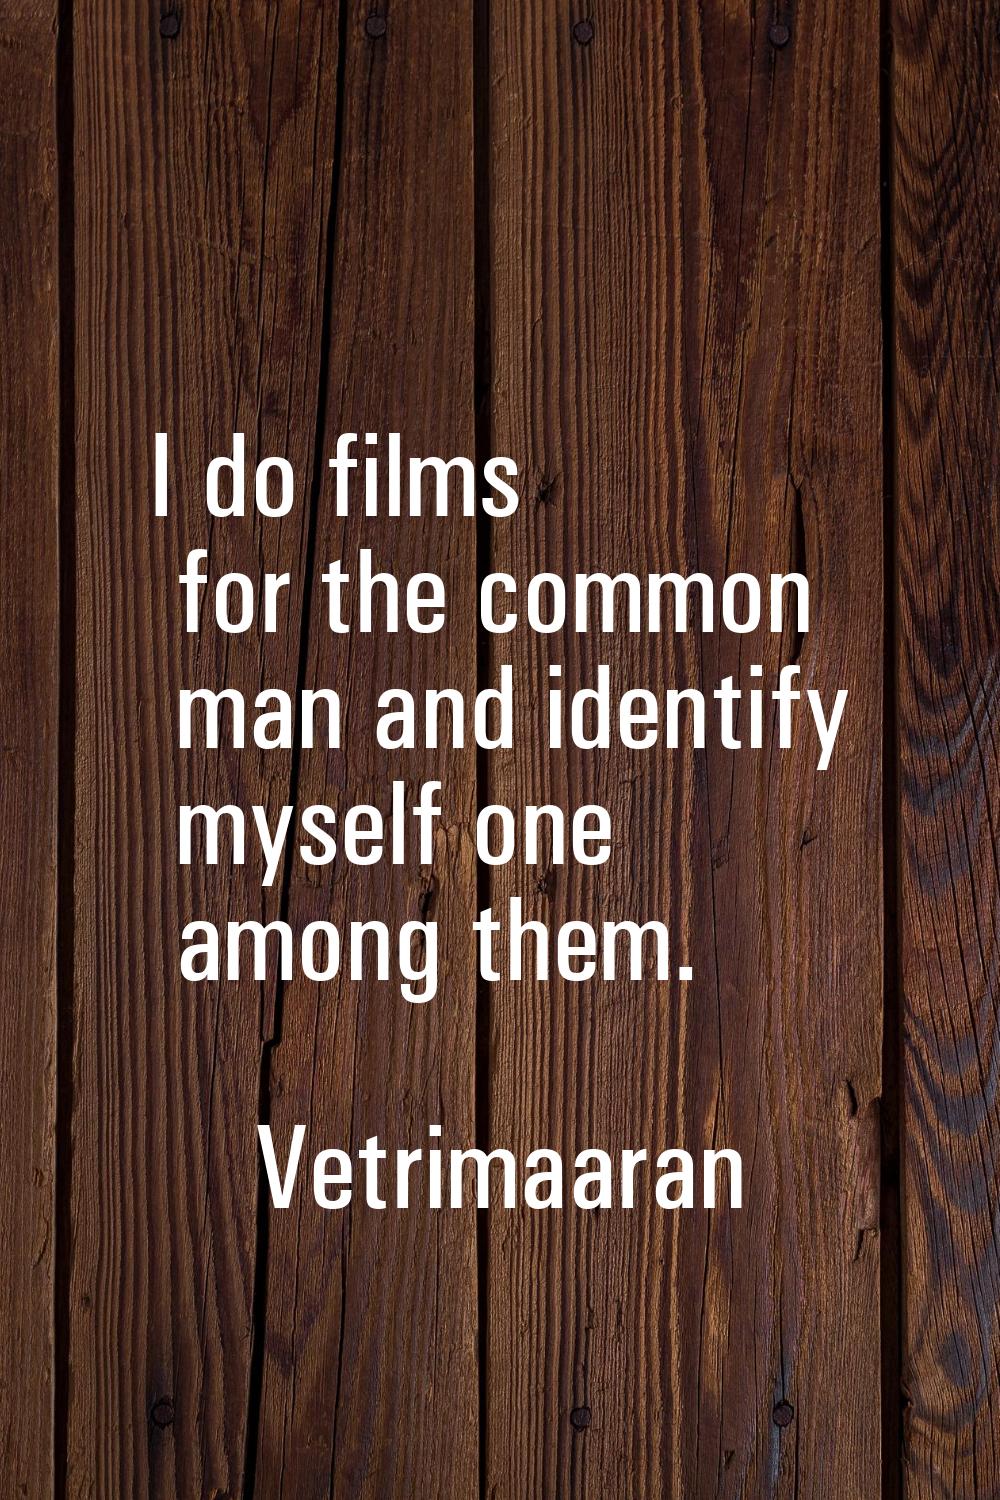 I do films for the common man and identify myself one among them.